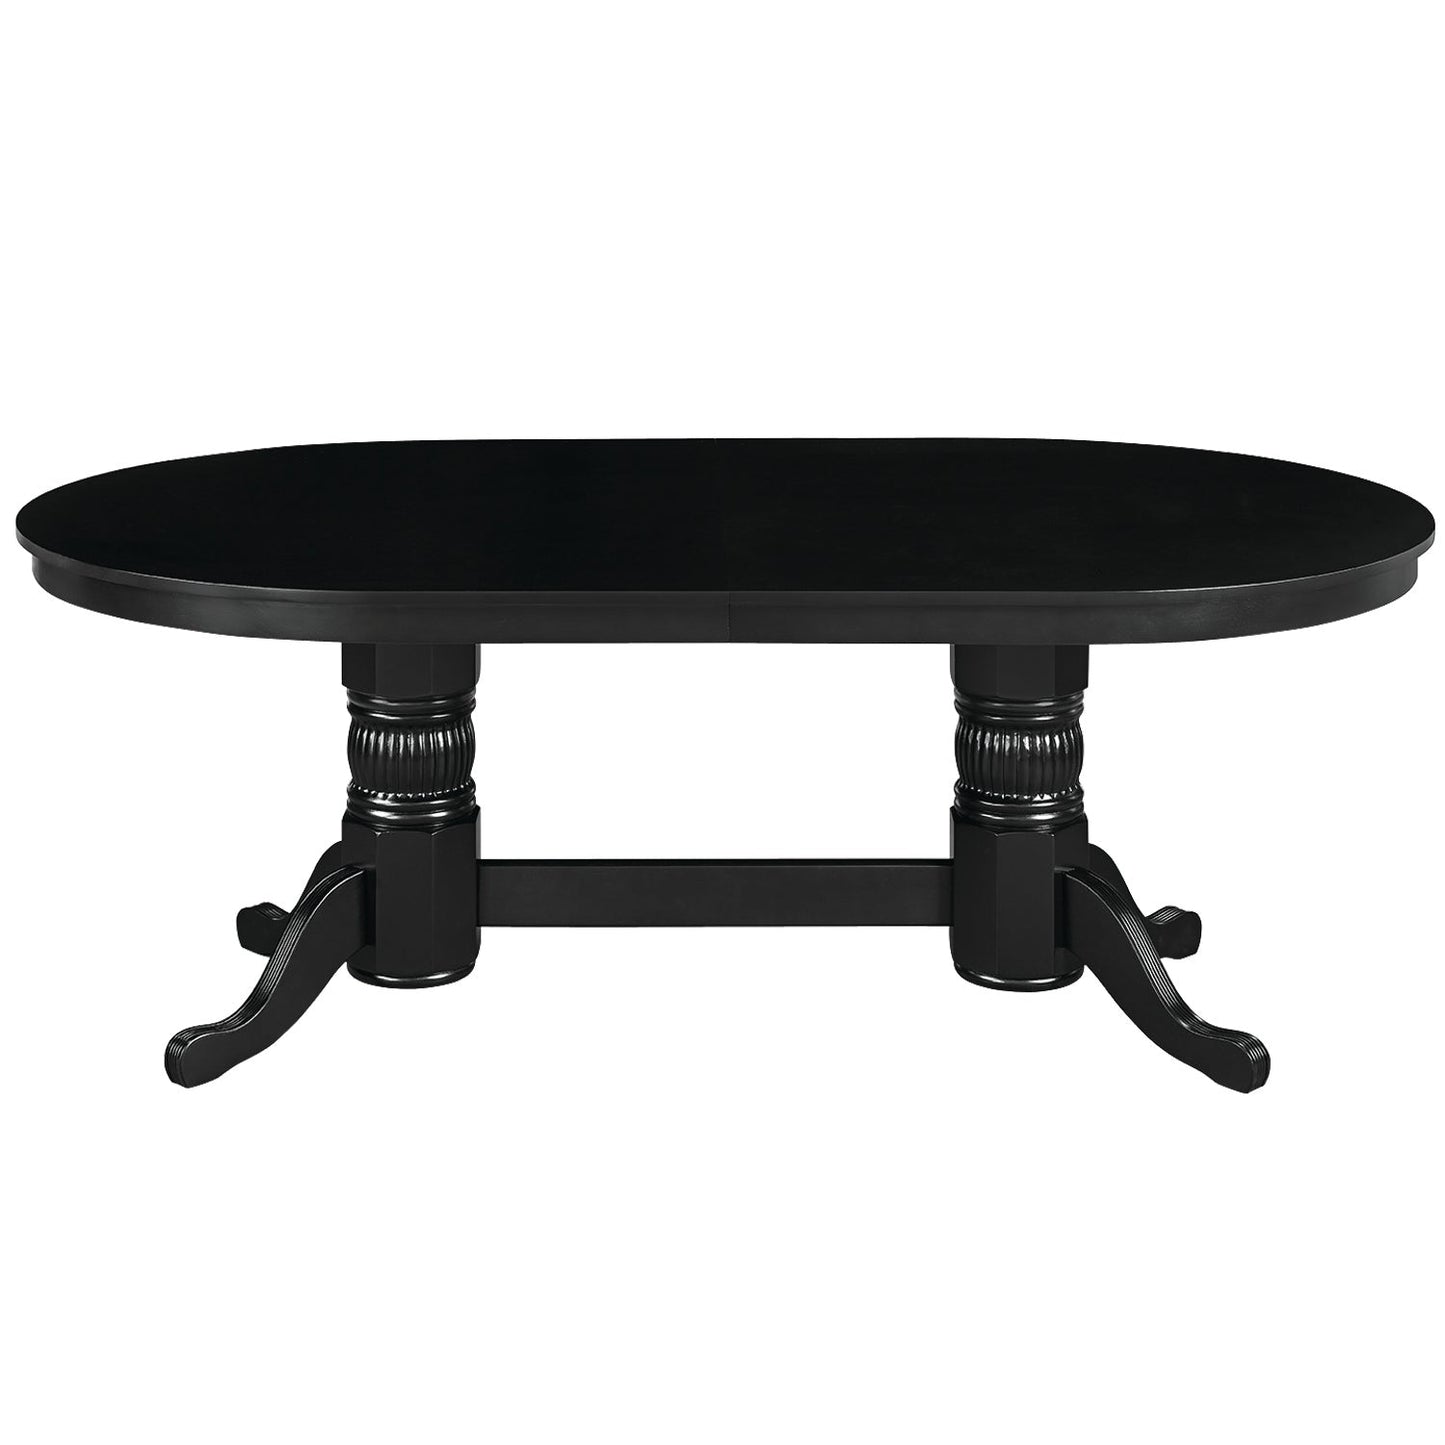 84" TEXAS HOLD'EM GAME TABLE DINING TOP- BLACK